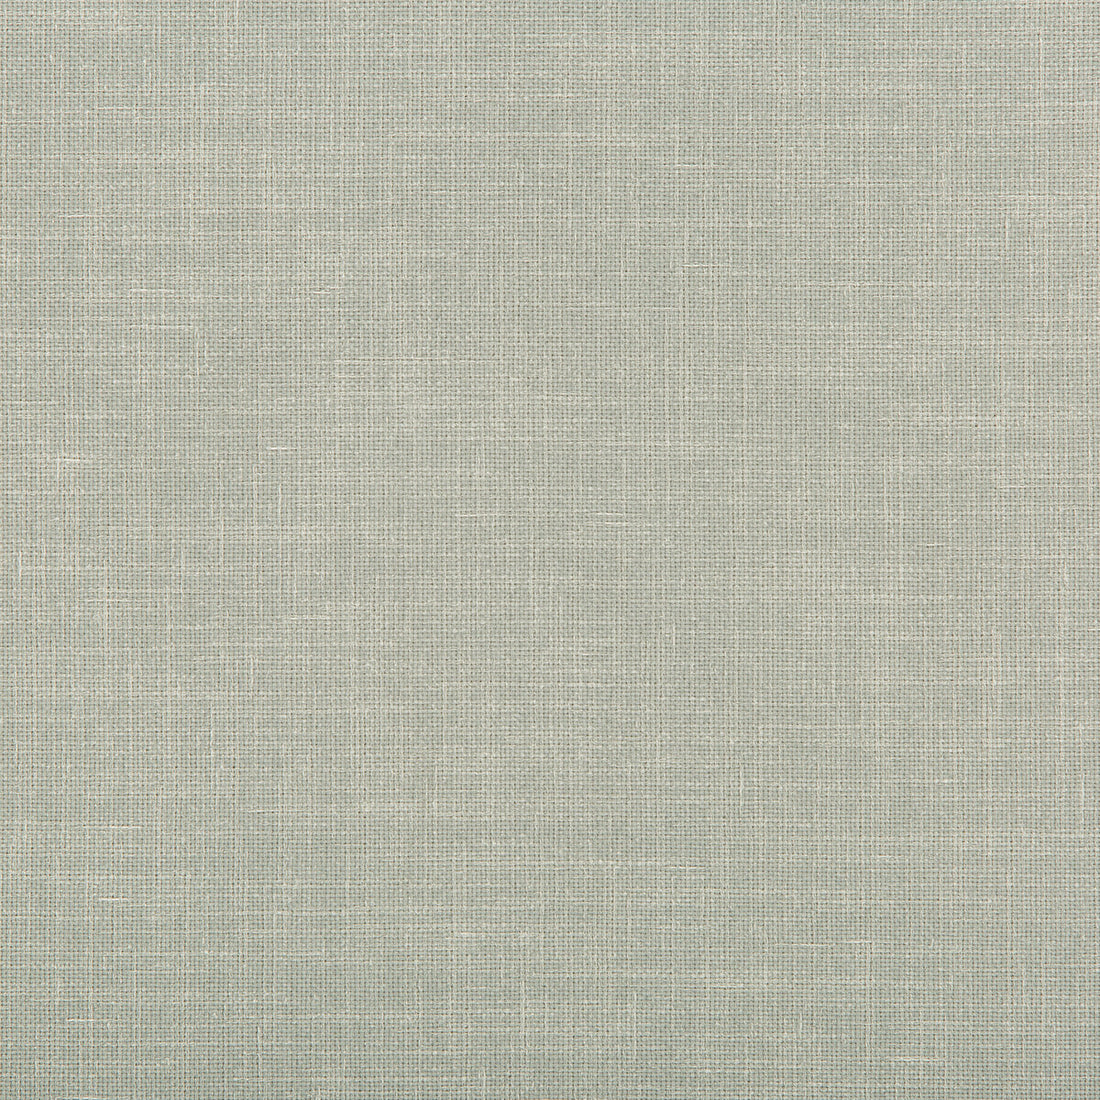 Kravet Contract fabric in 4639-11 color - pattern 4639.11.0 - by Kravet Contract